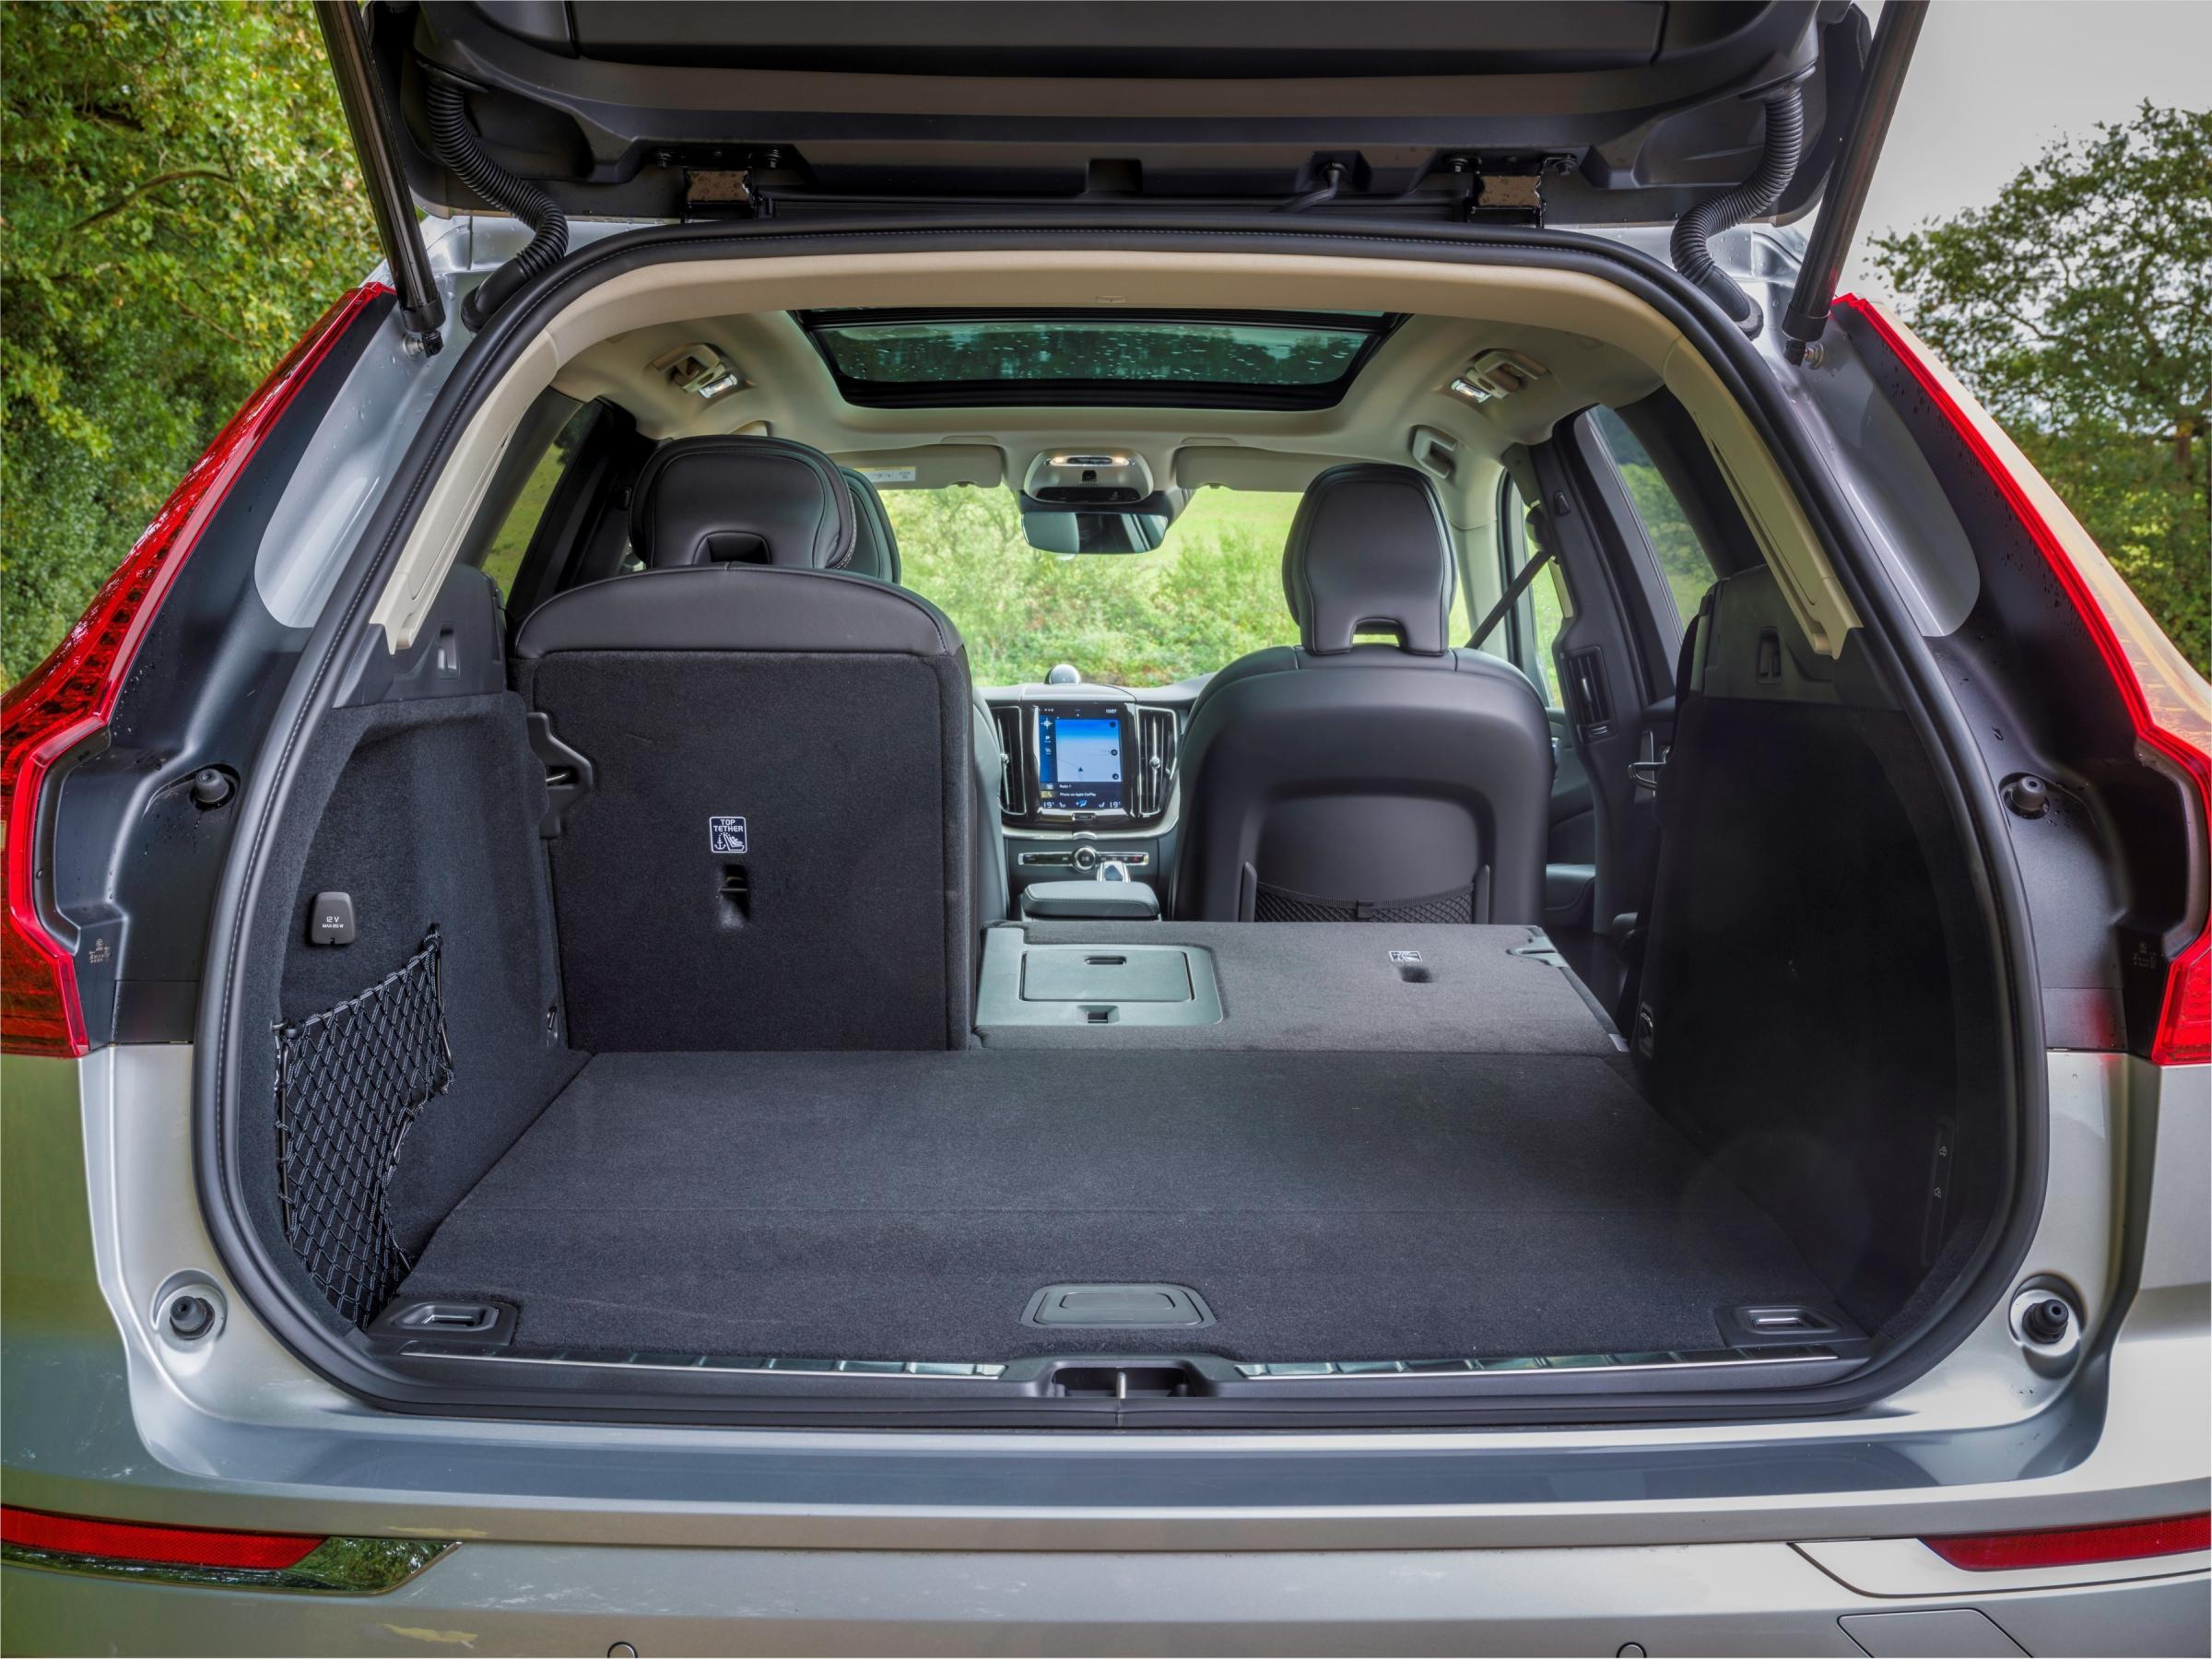 The rear luggage area in the Volvo XC60 can swallow a lot of gear, especially when the split-fold rear seats are deployed